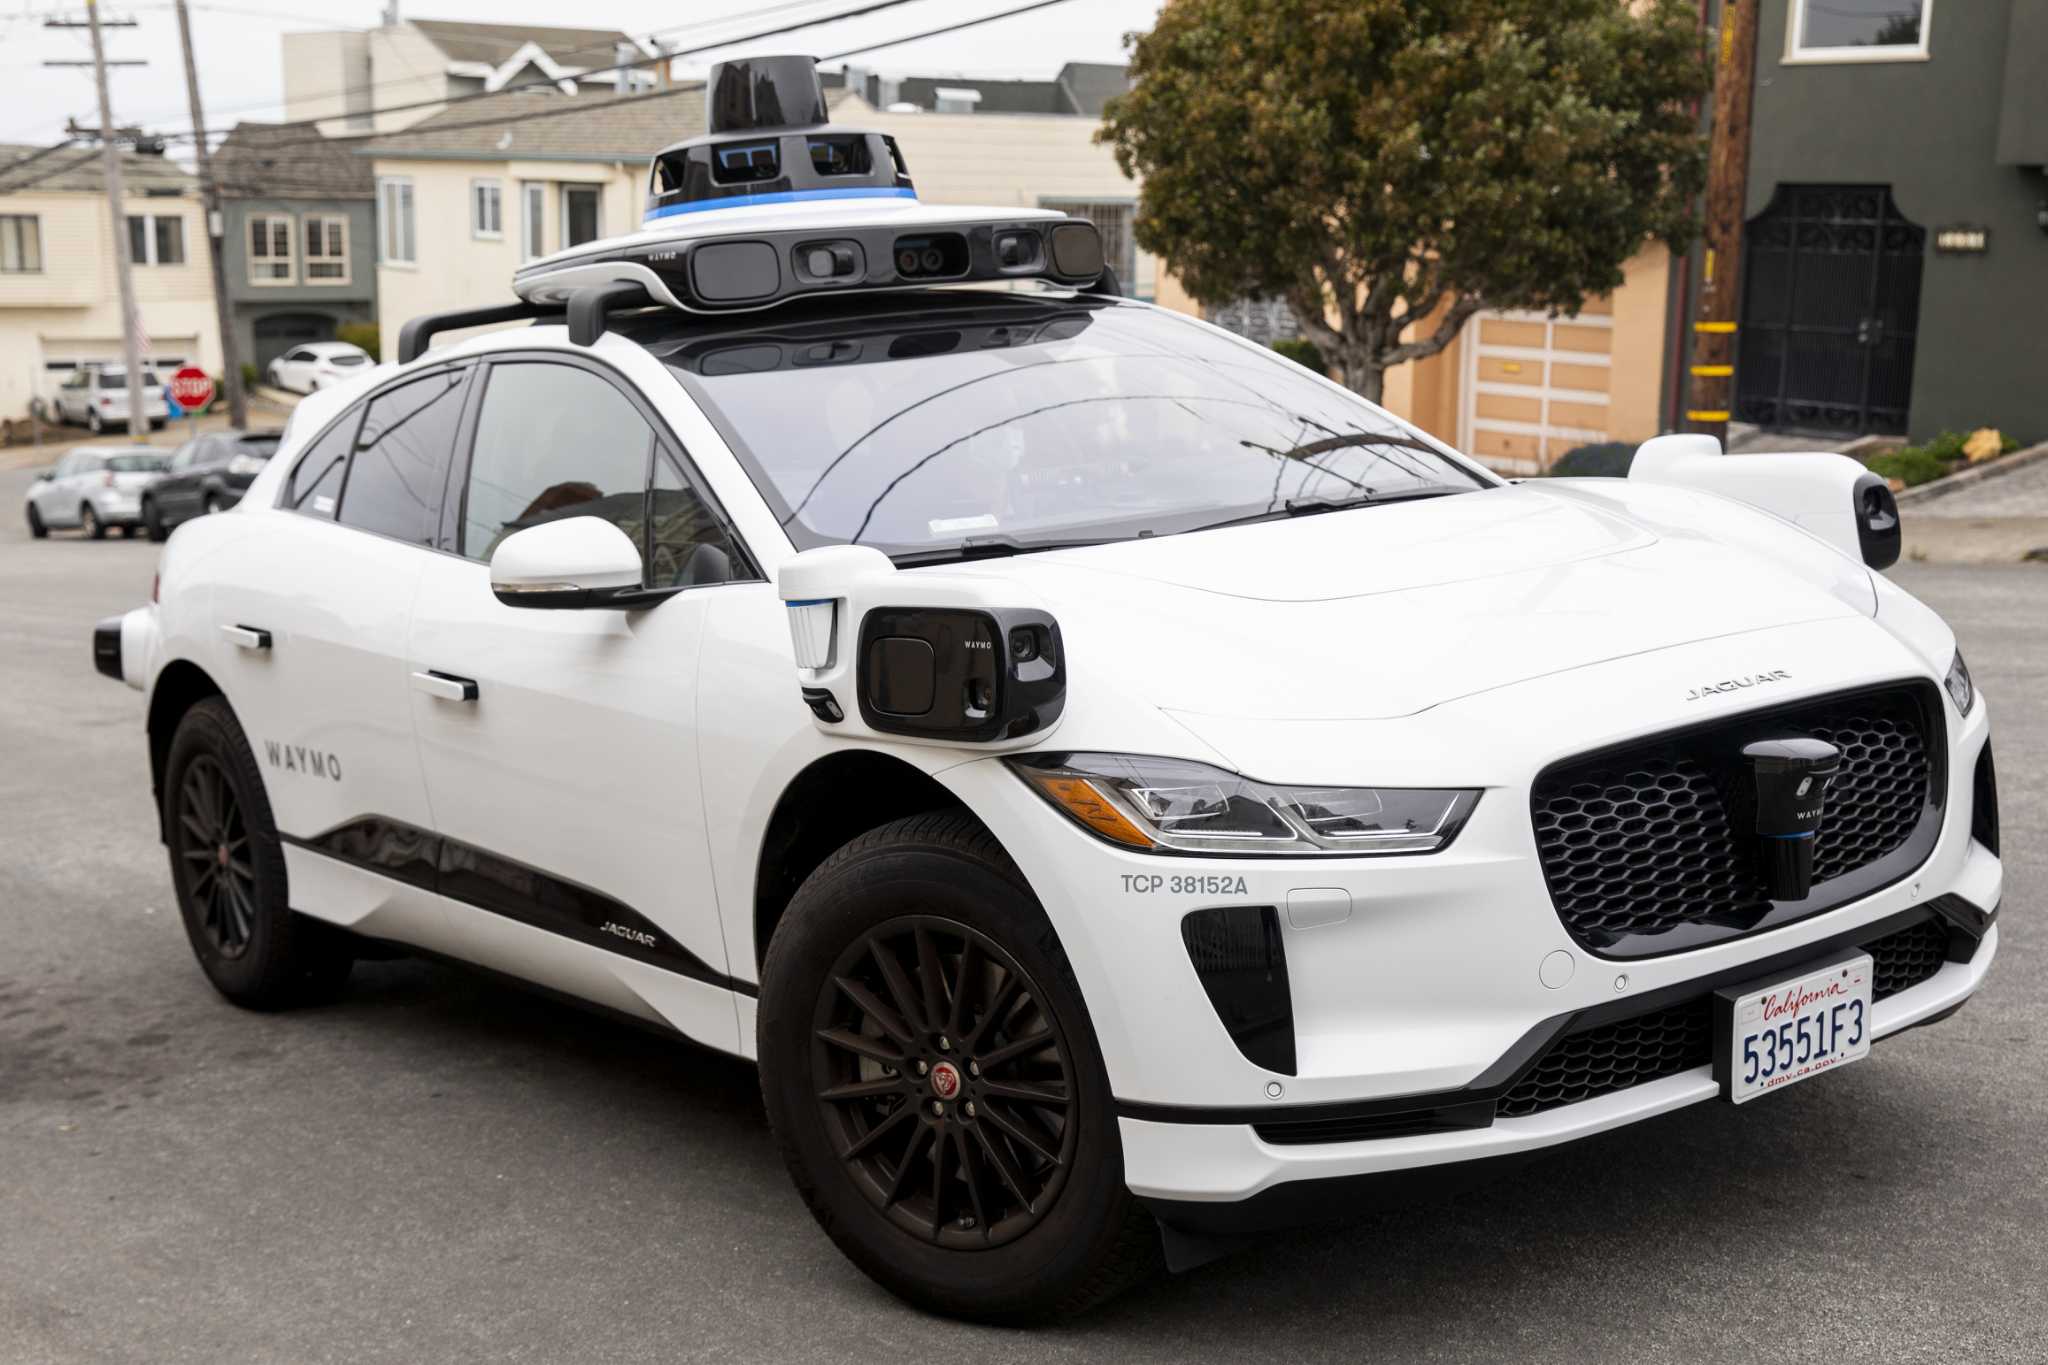 waymo-robotaxi-vandalized-and-set-on-fire-in-san-francisco